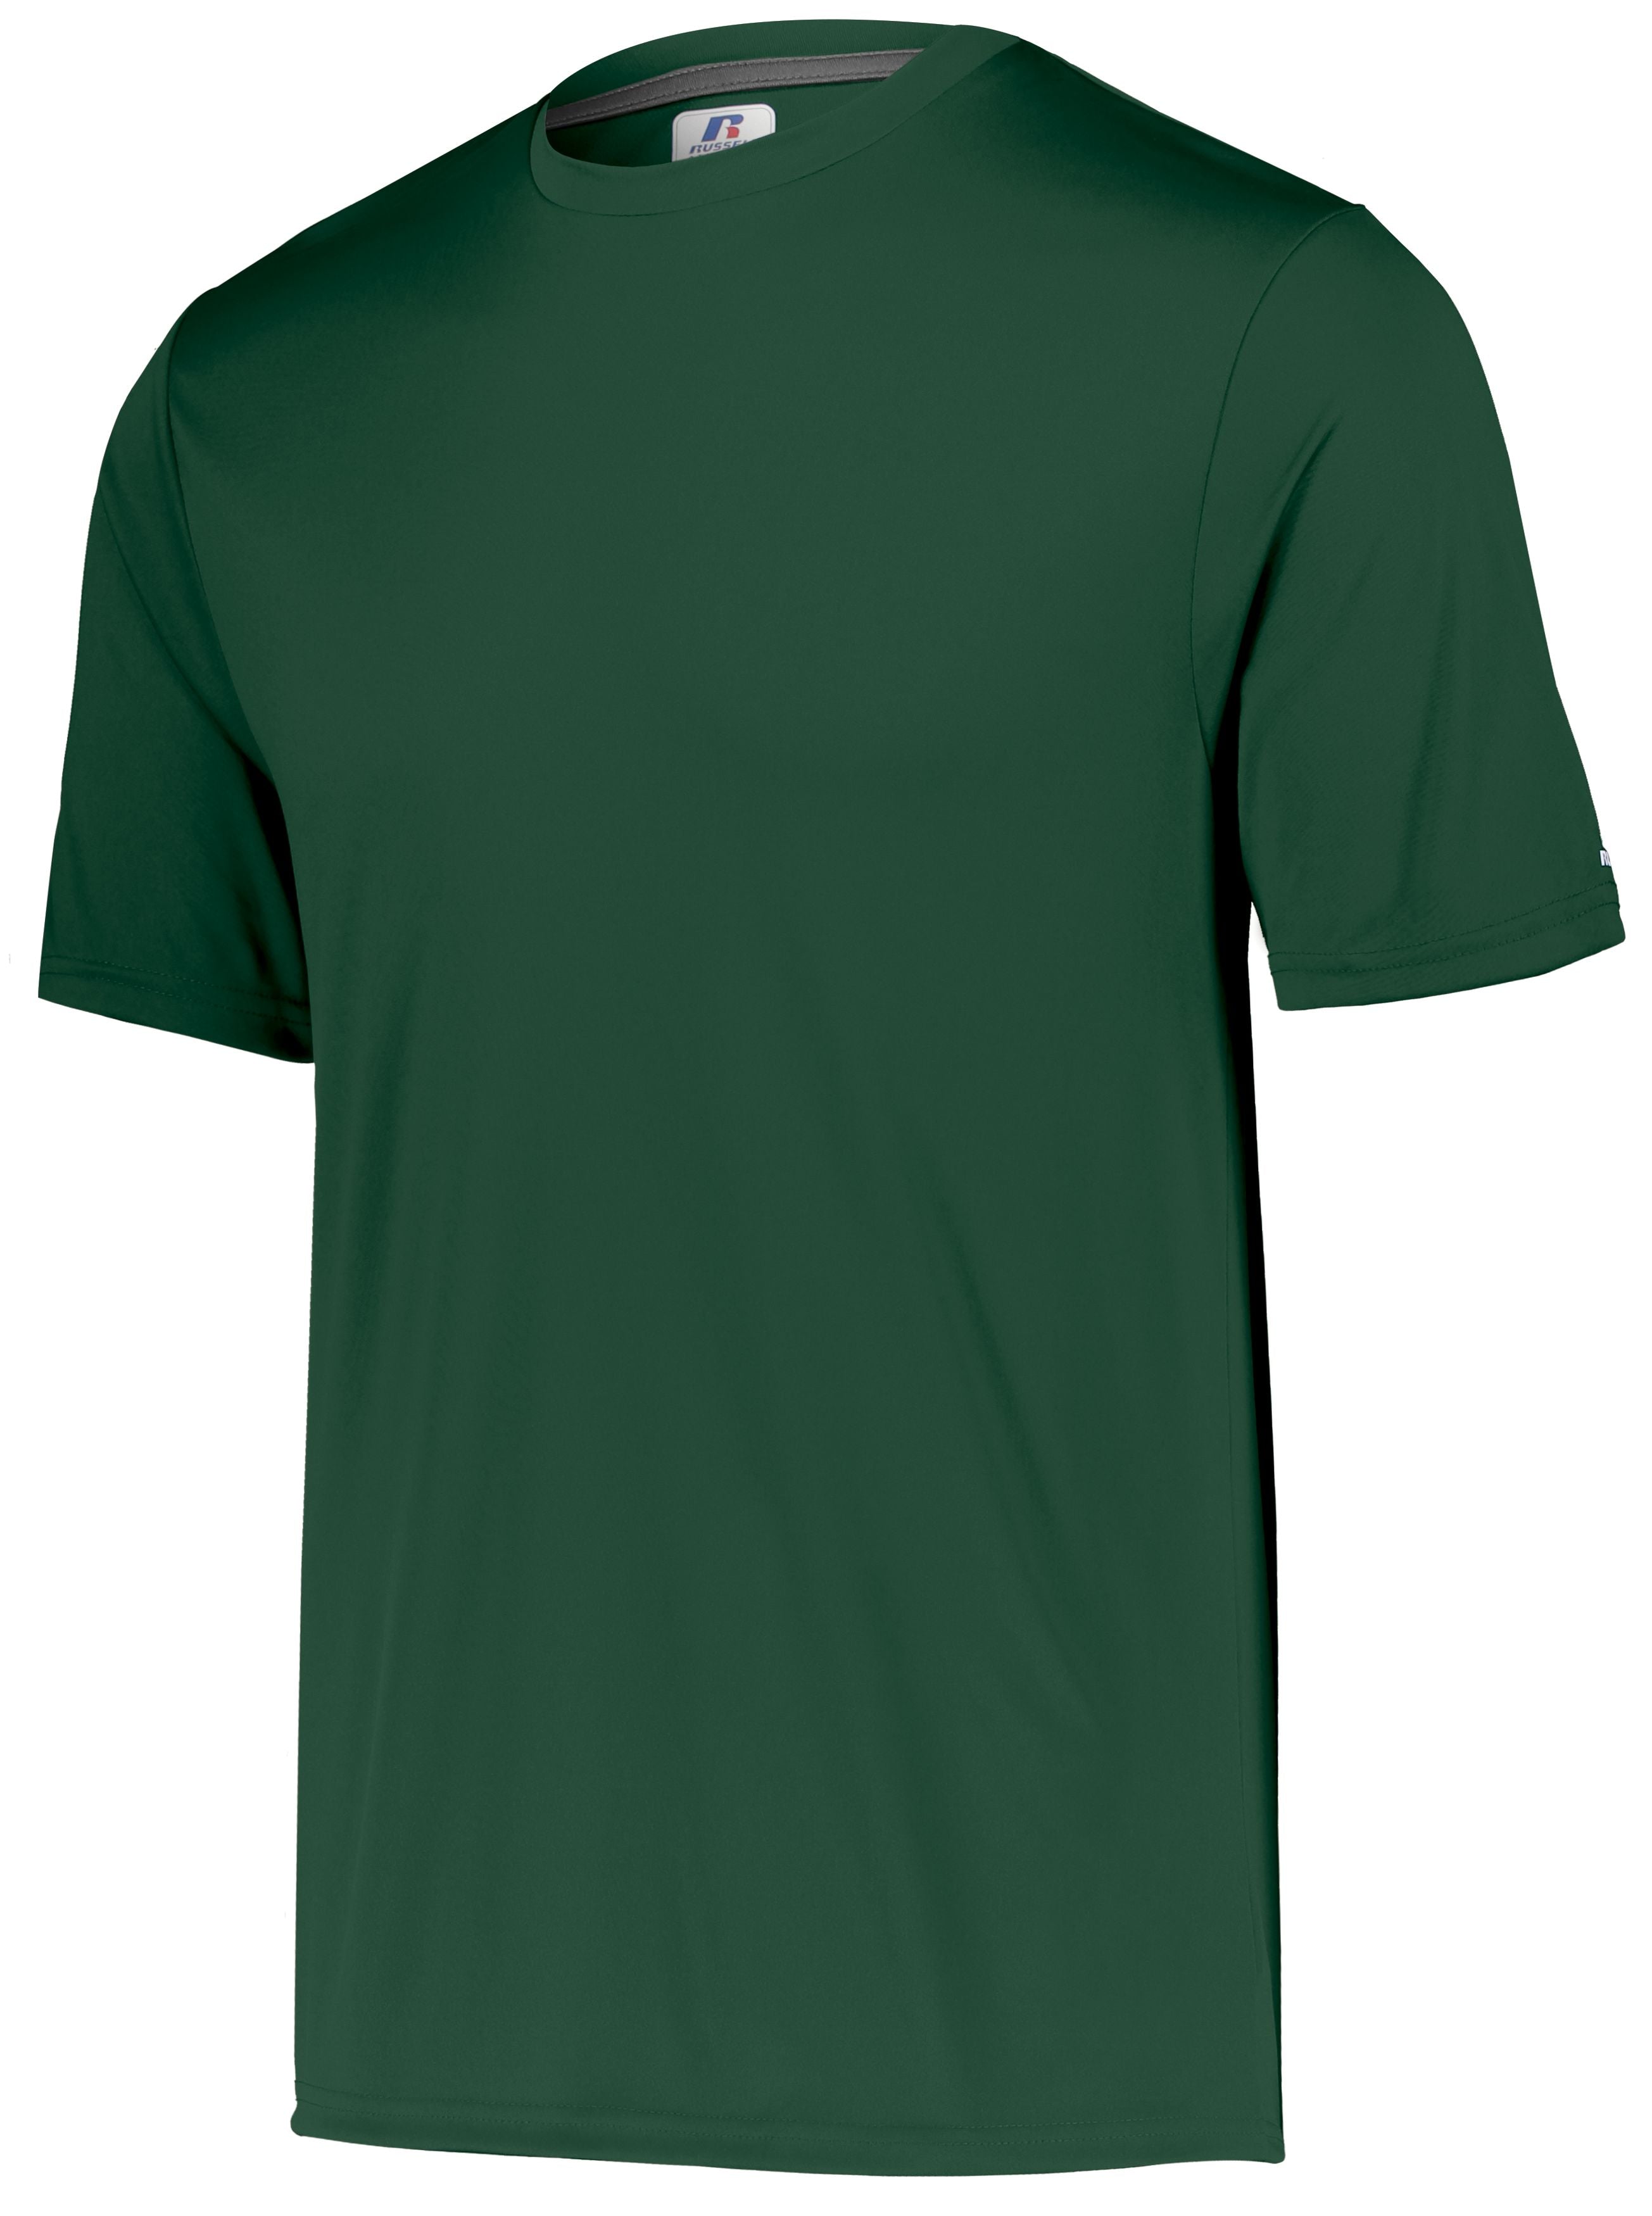 Russell Athletic Dri-Power Core Performance Tee in Dark Green  -Part of the Adult, Adult-Tee-Shirt, T-Shirts, Russell-Athletic-Products, Shirts product lines at KanaleyCreations.com